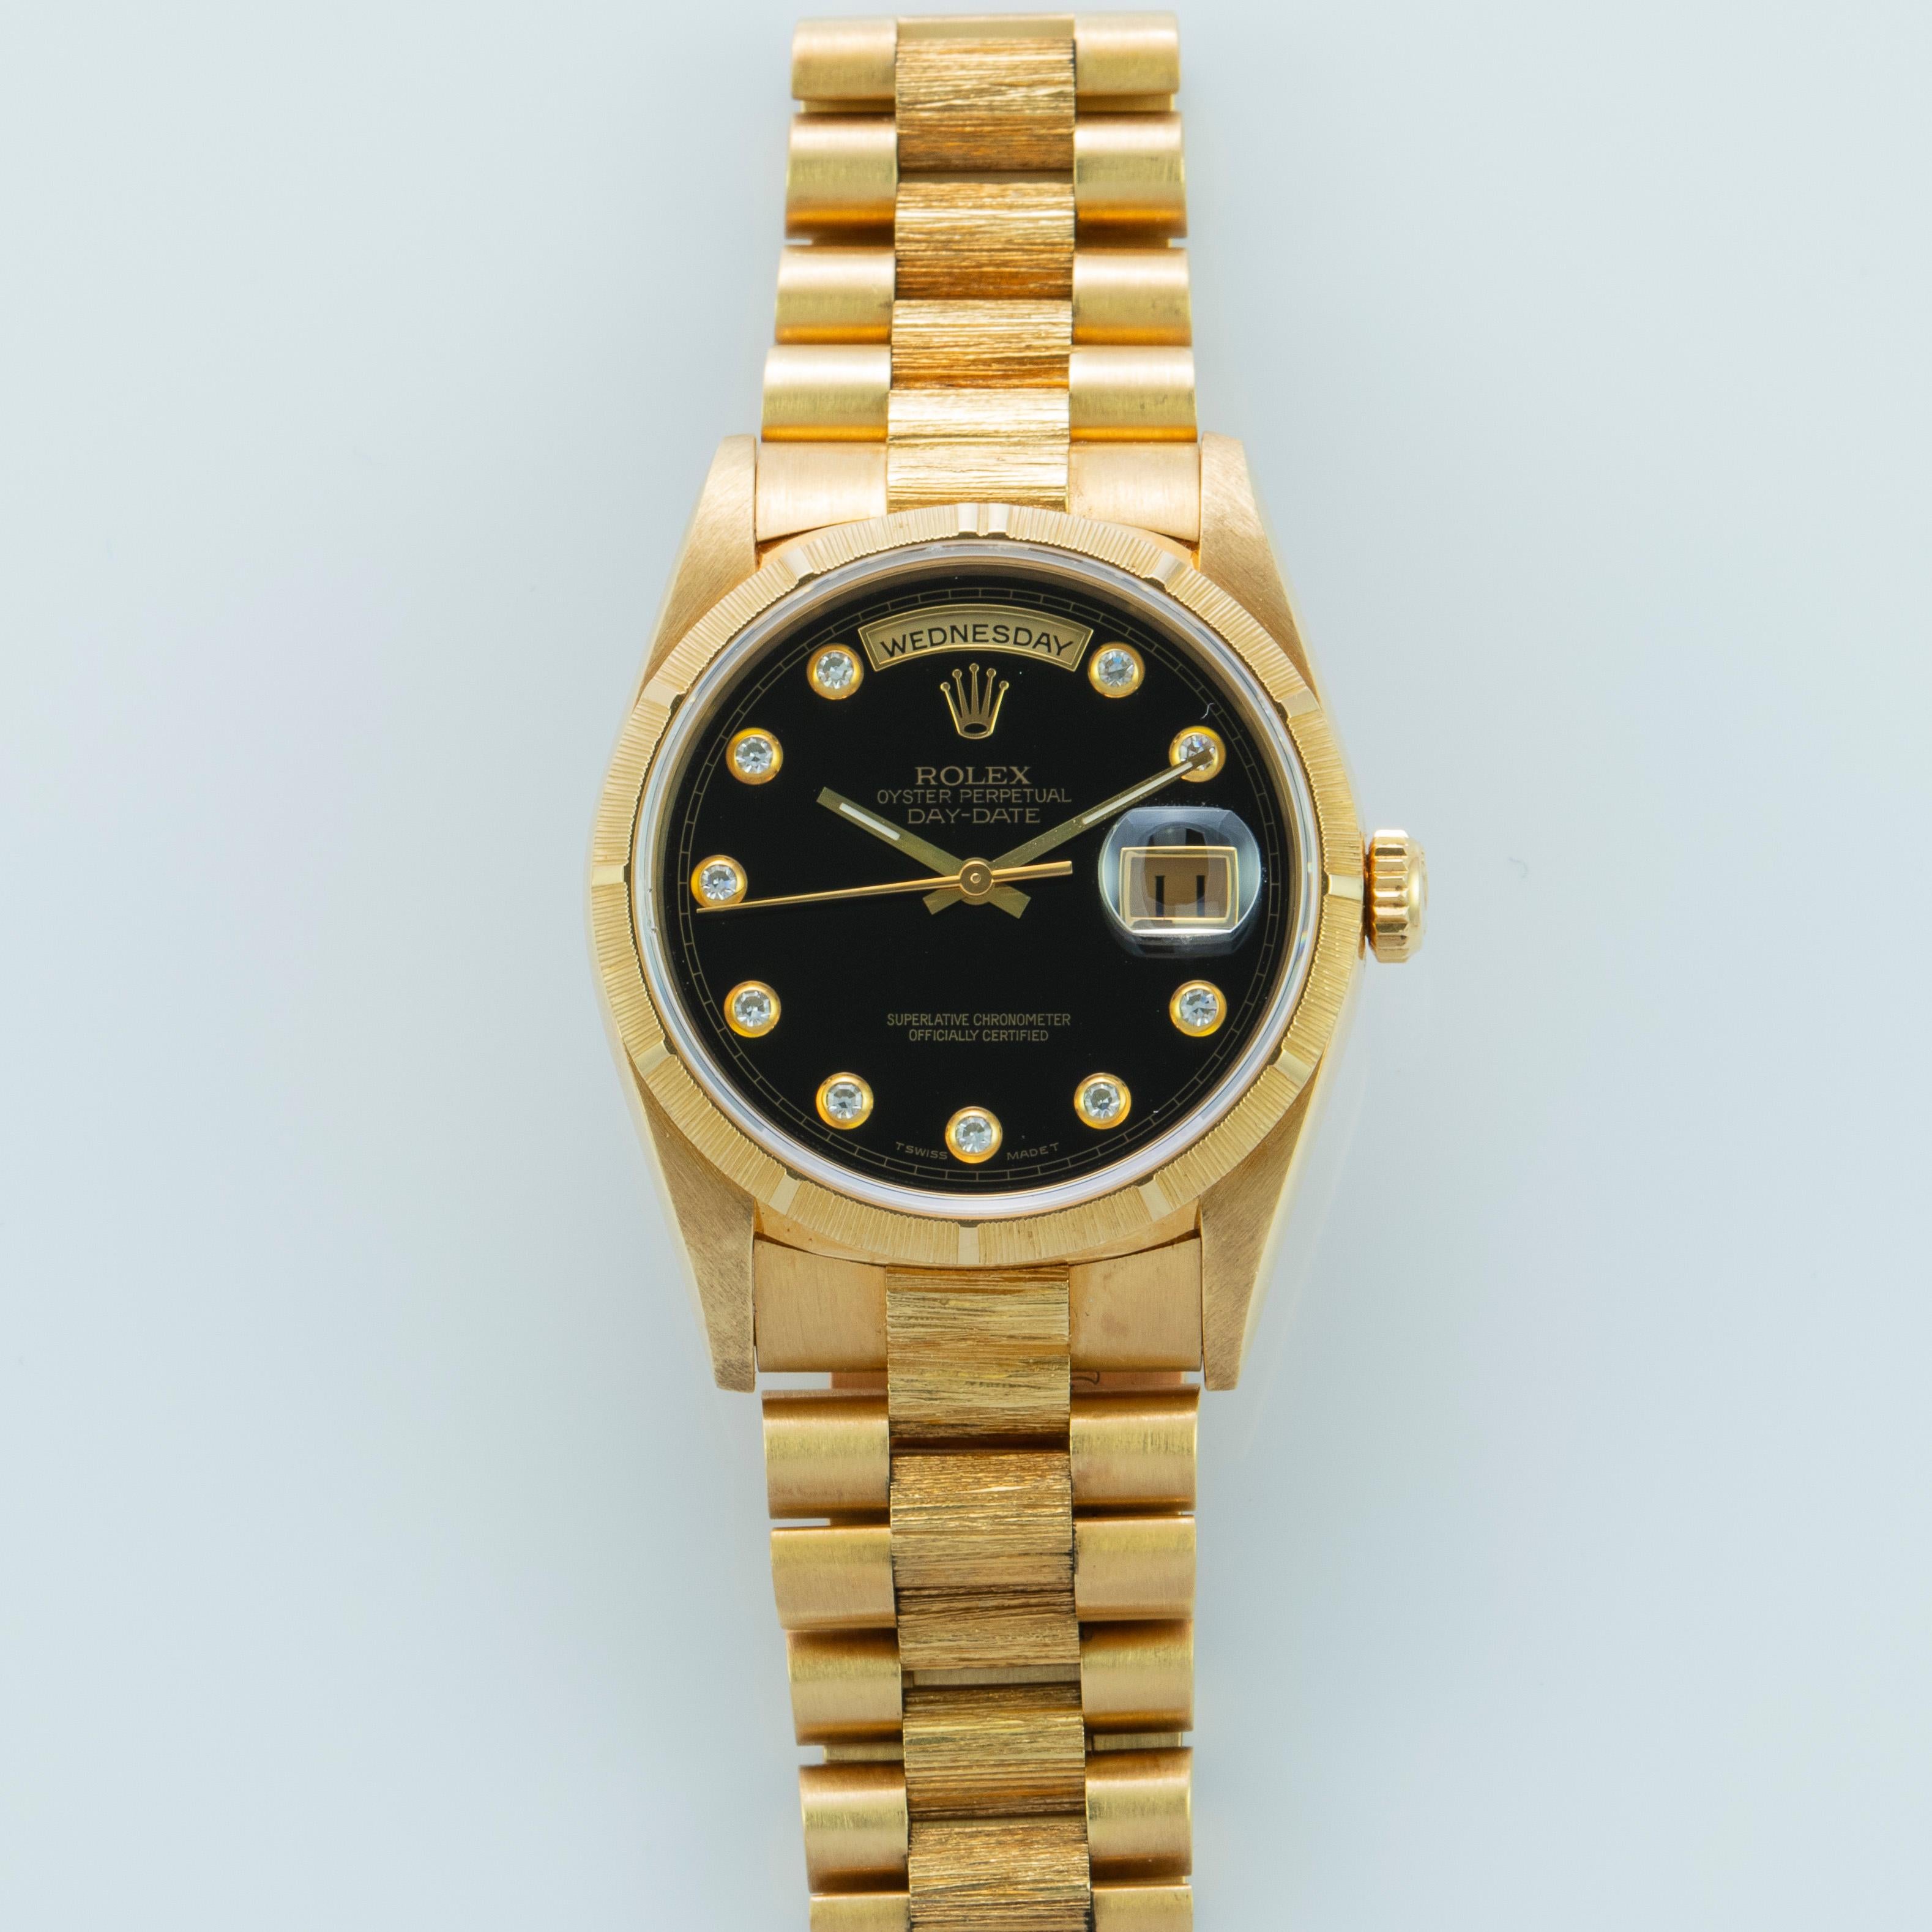 Rolex 18K Yellow Gold Day-Date Presidential Watch with Factory Bark Finish
Rare Factory Rolex Black Onyx Serti Dial with Bezel Set Diamond Hour Markers 
Onyx Serti Is One Of The Rarest Rolex Stone Dials Produced
Very Unusual and Rare Dial
Rare Bark